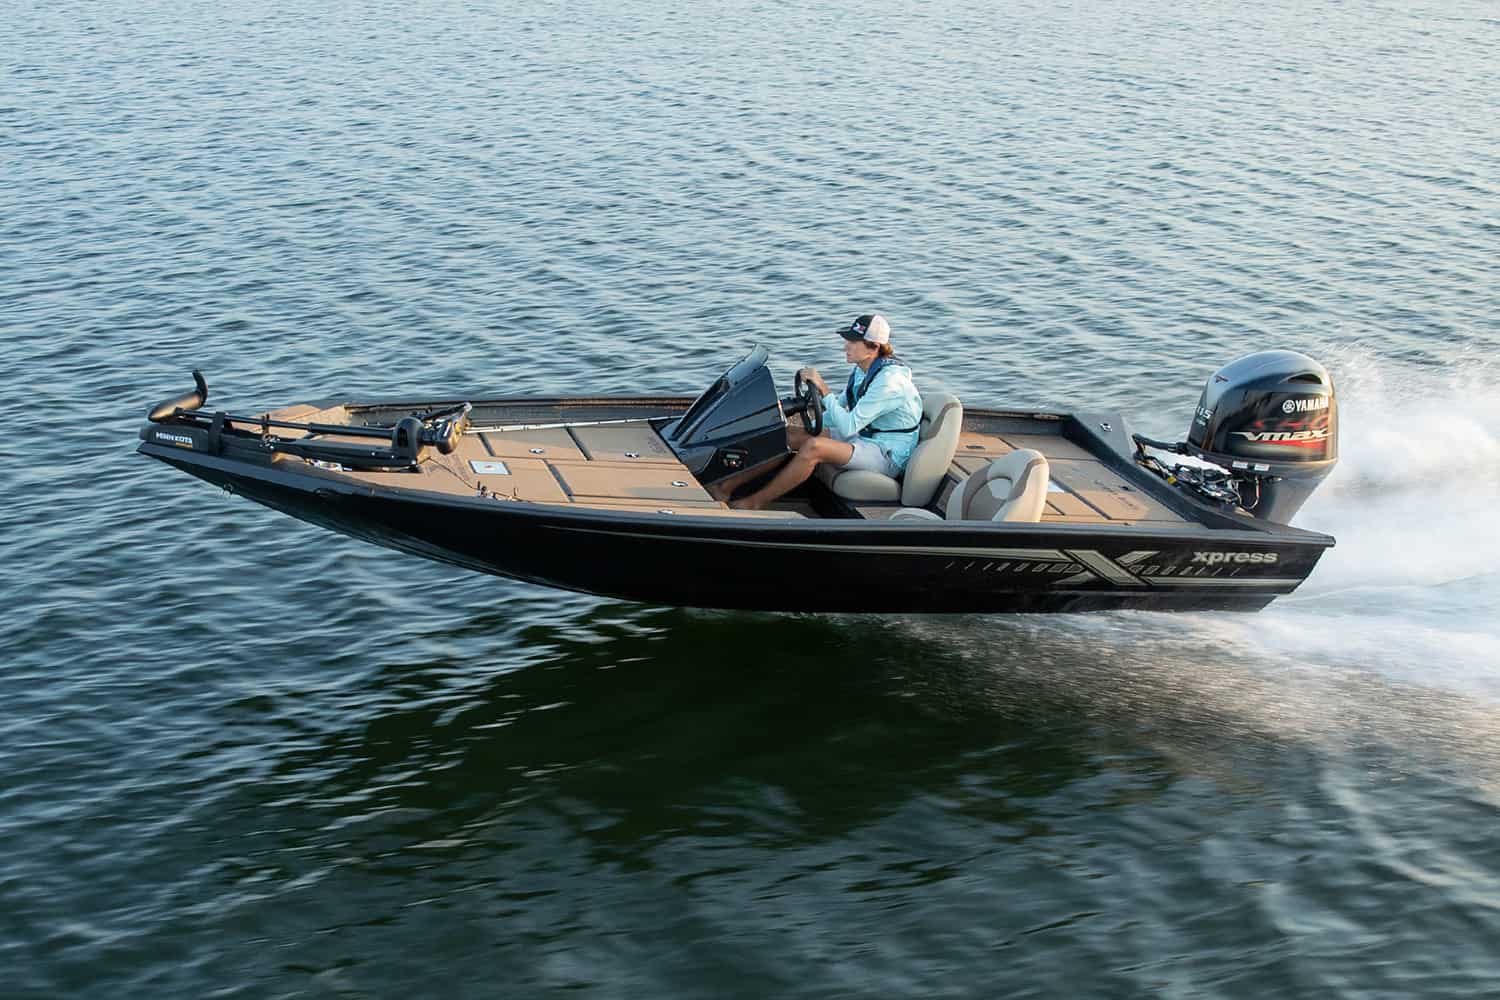 Xpress Boats the Original High Performance Aluminum Boat: Revolutionizing the Industry